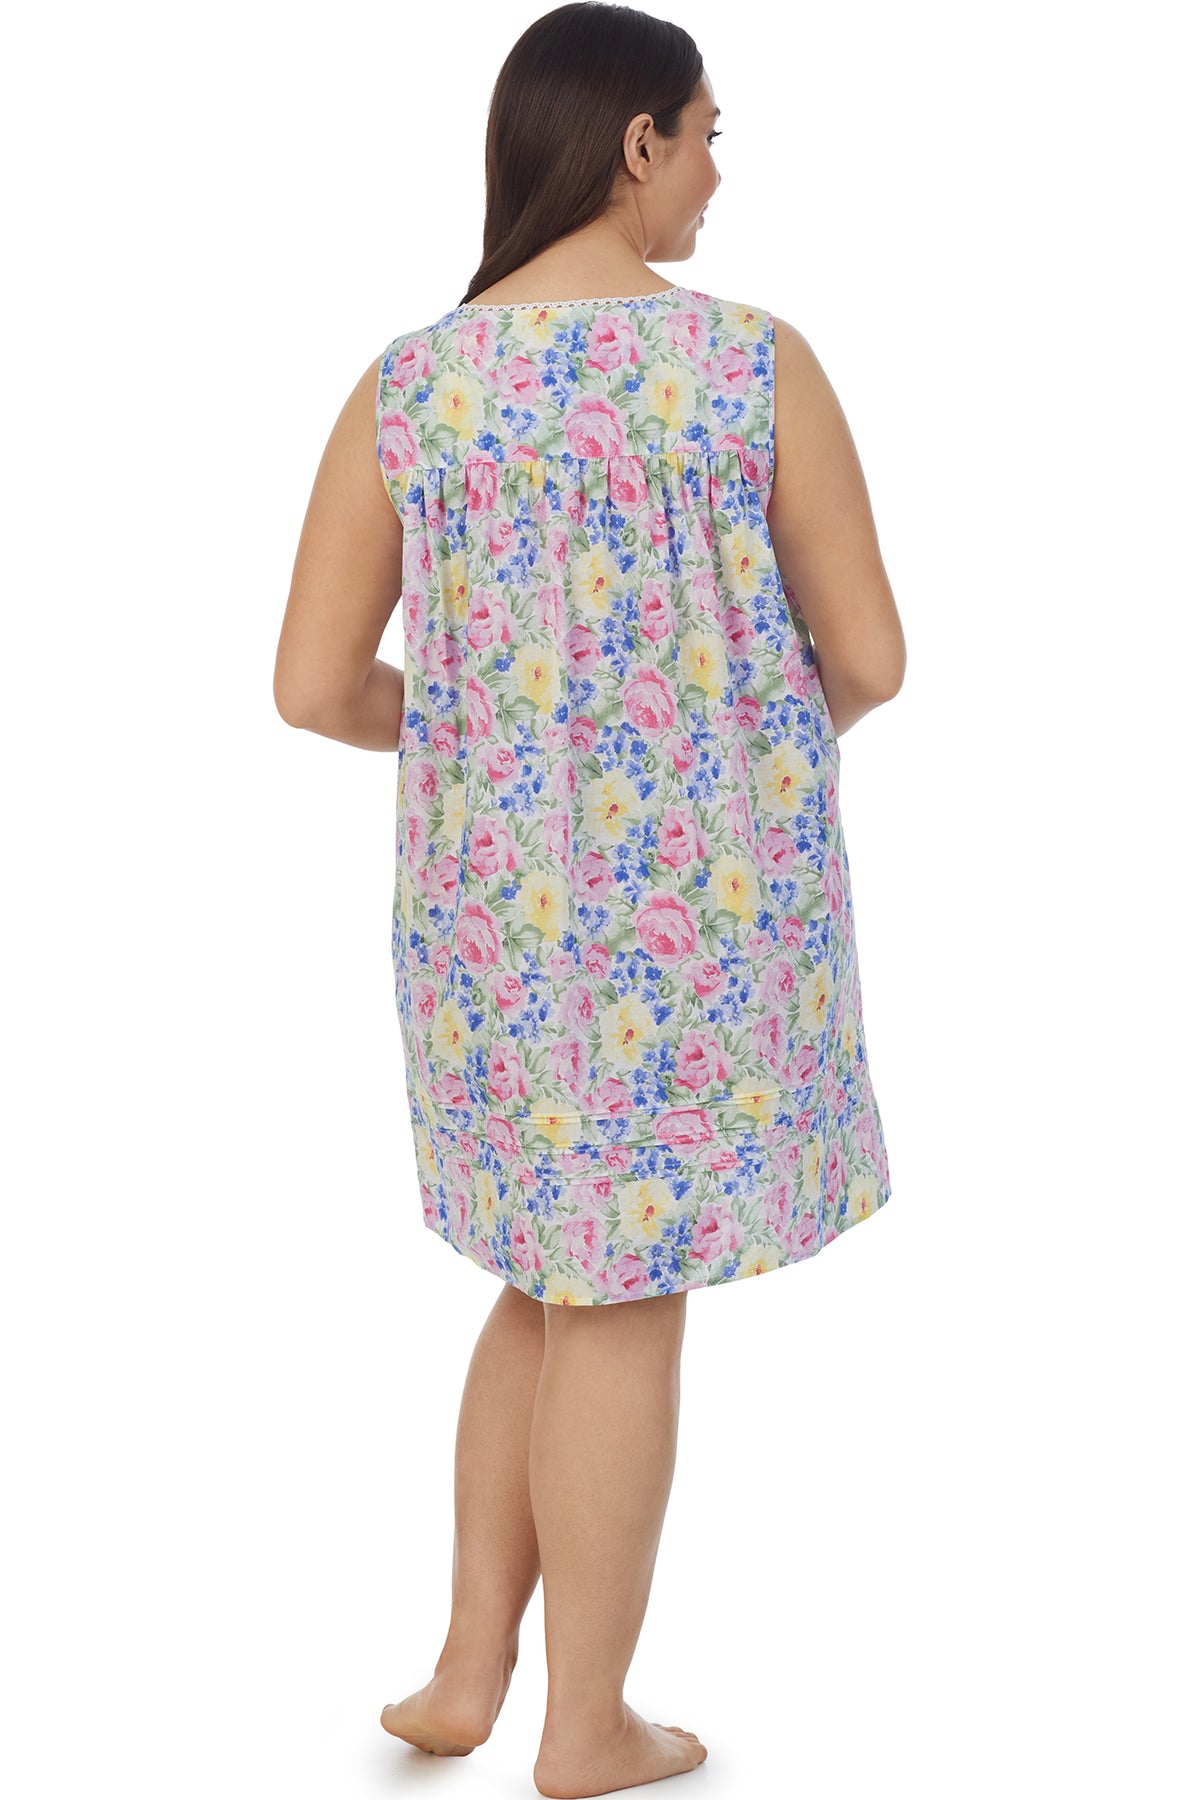 A lady wearing a sleeveless short chemise with multicolor ditsy floral pattern.